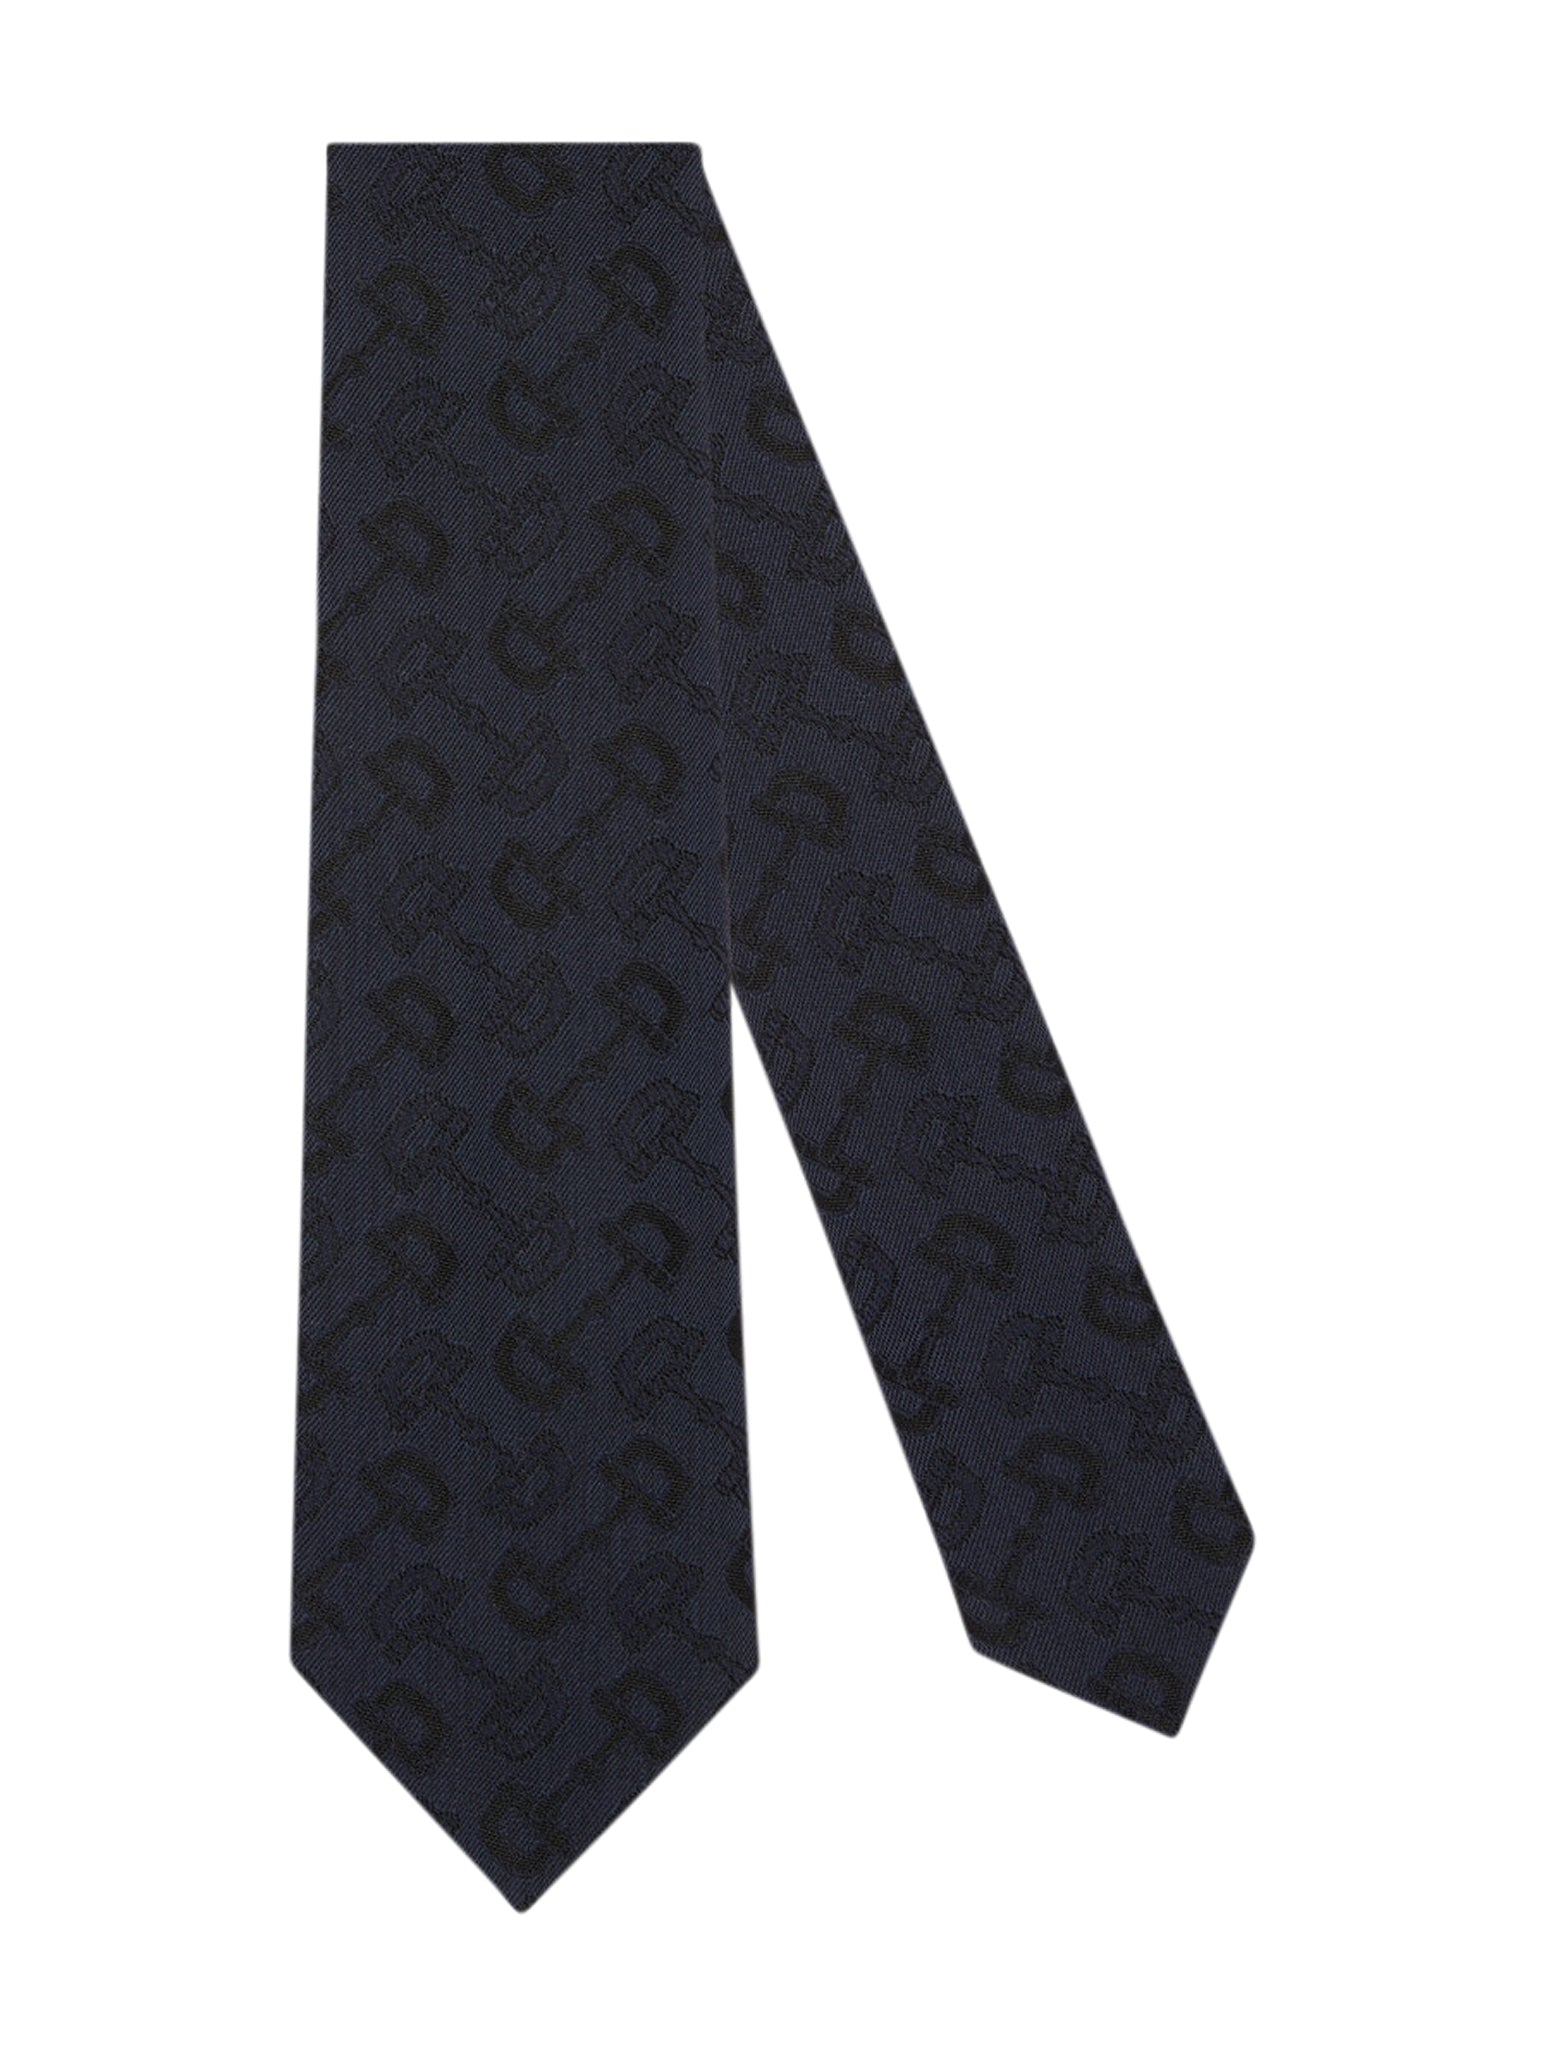 Wool and cotton jacquard tie with Horsebit